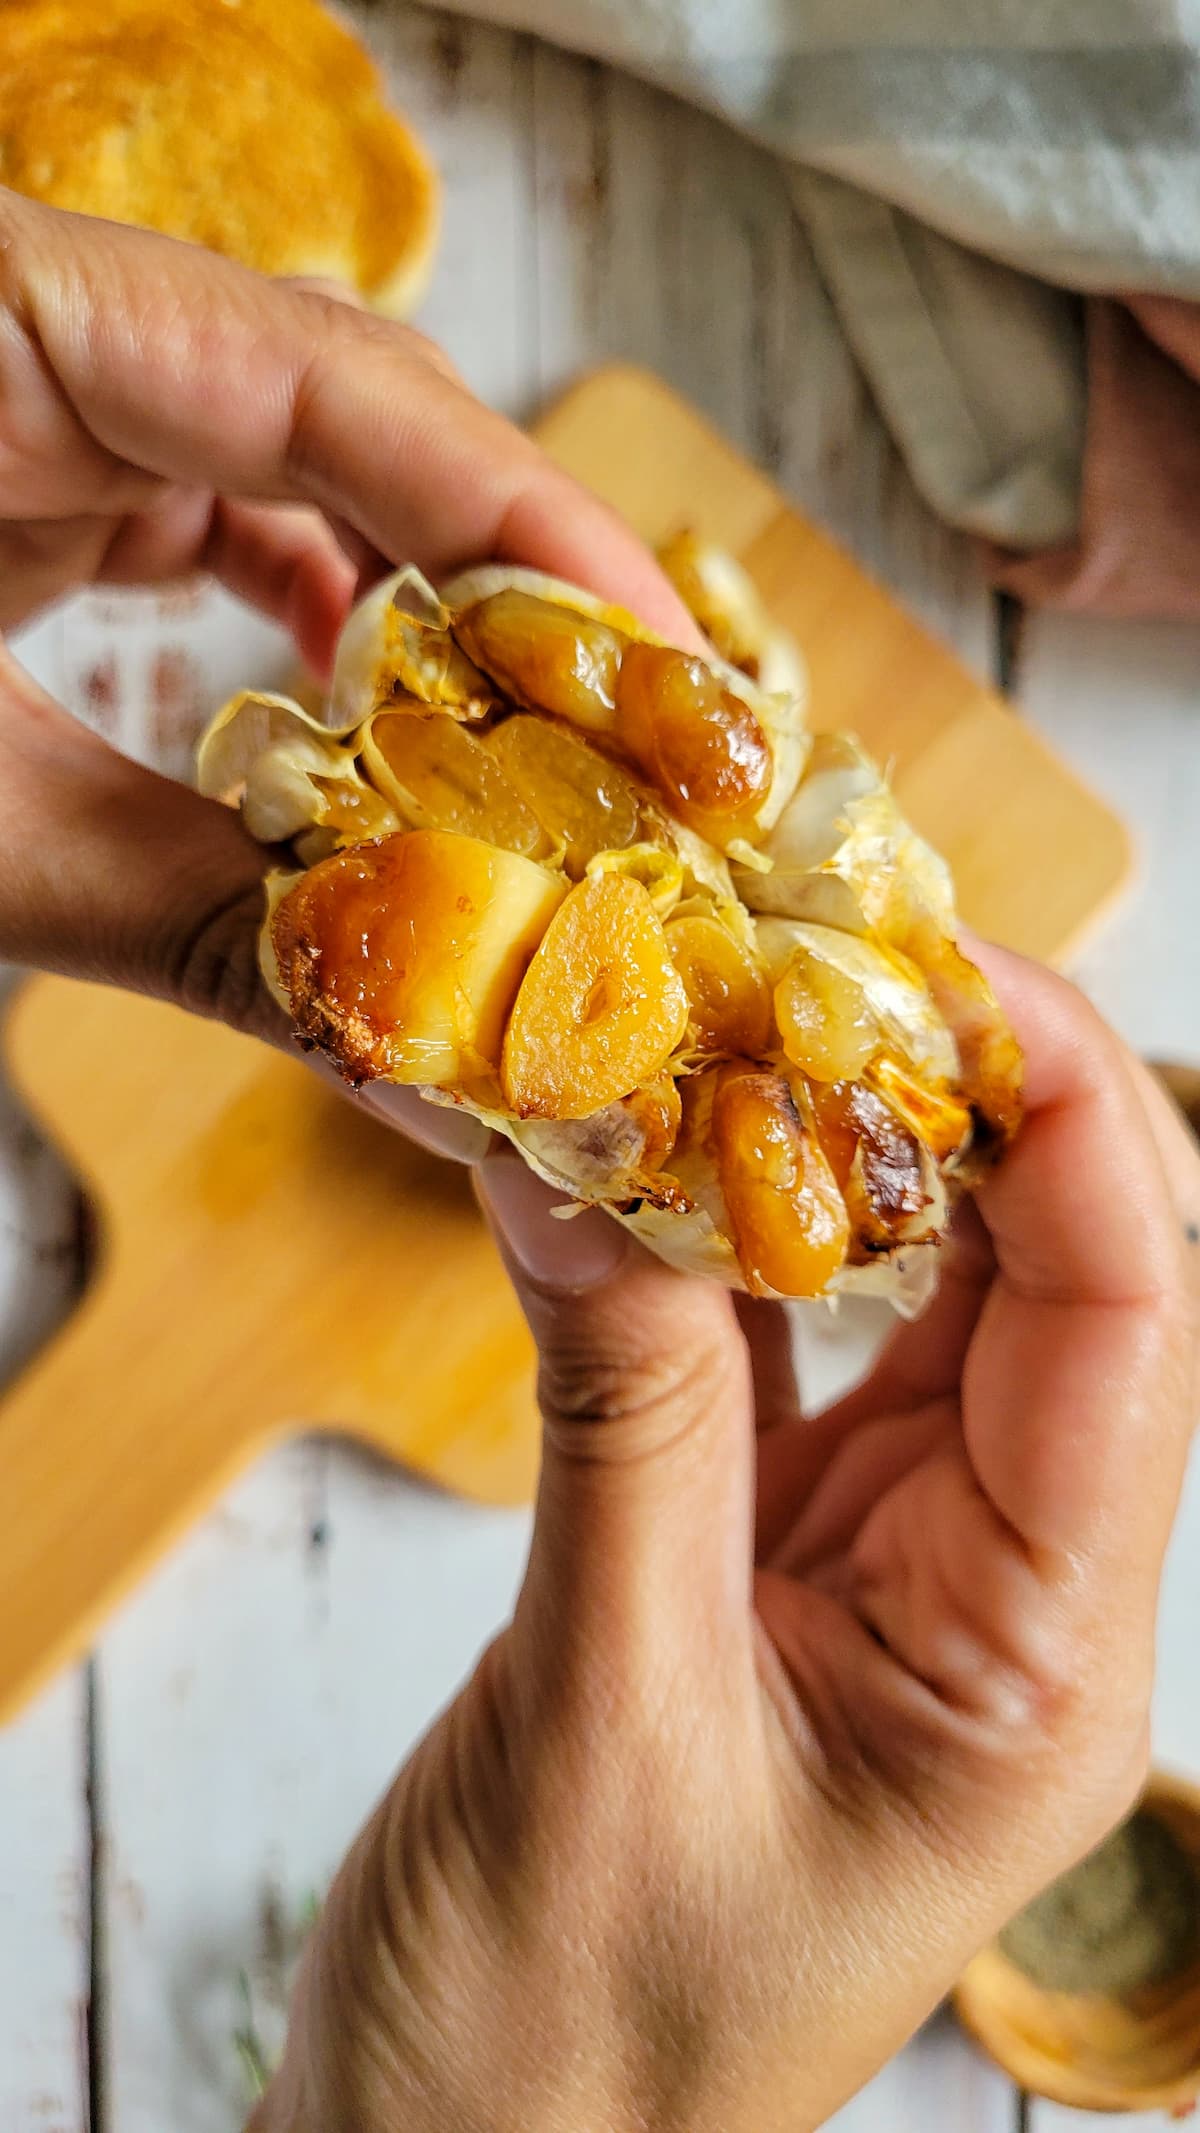 hands squeezing roasted garlic cloves out of a head